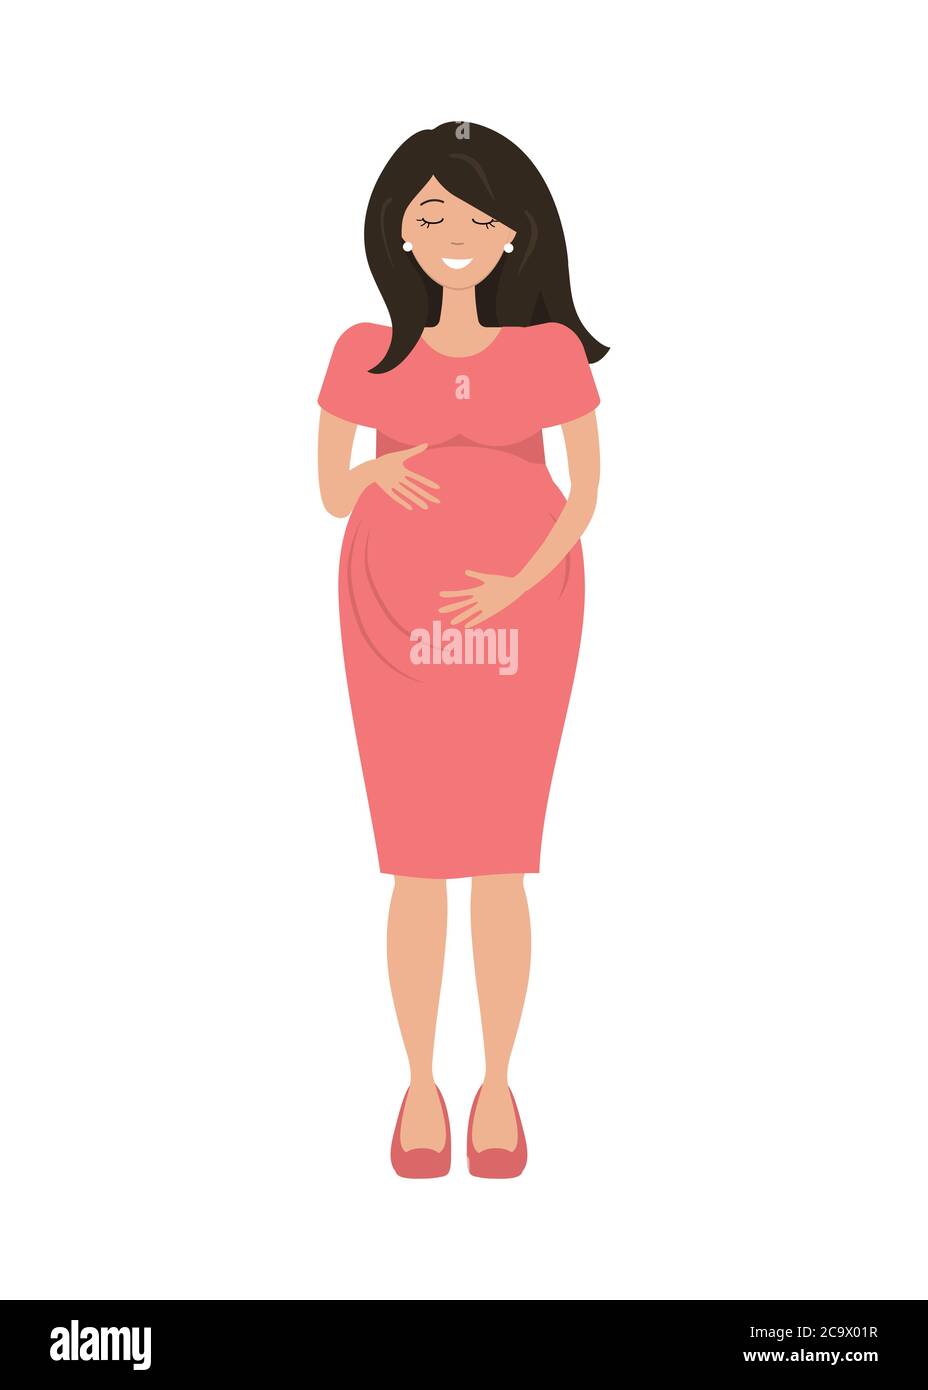 Pregnant woman in red dress isolated on a white background. A smiling woman holds her hands on her stomach. Vector illustration in cartoon style Stock Vector